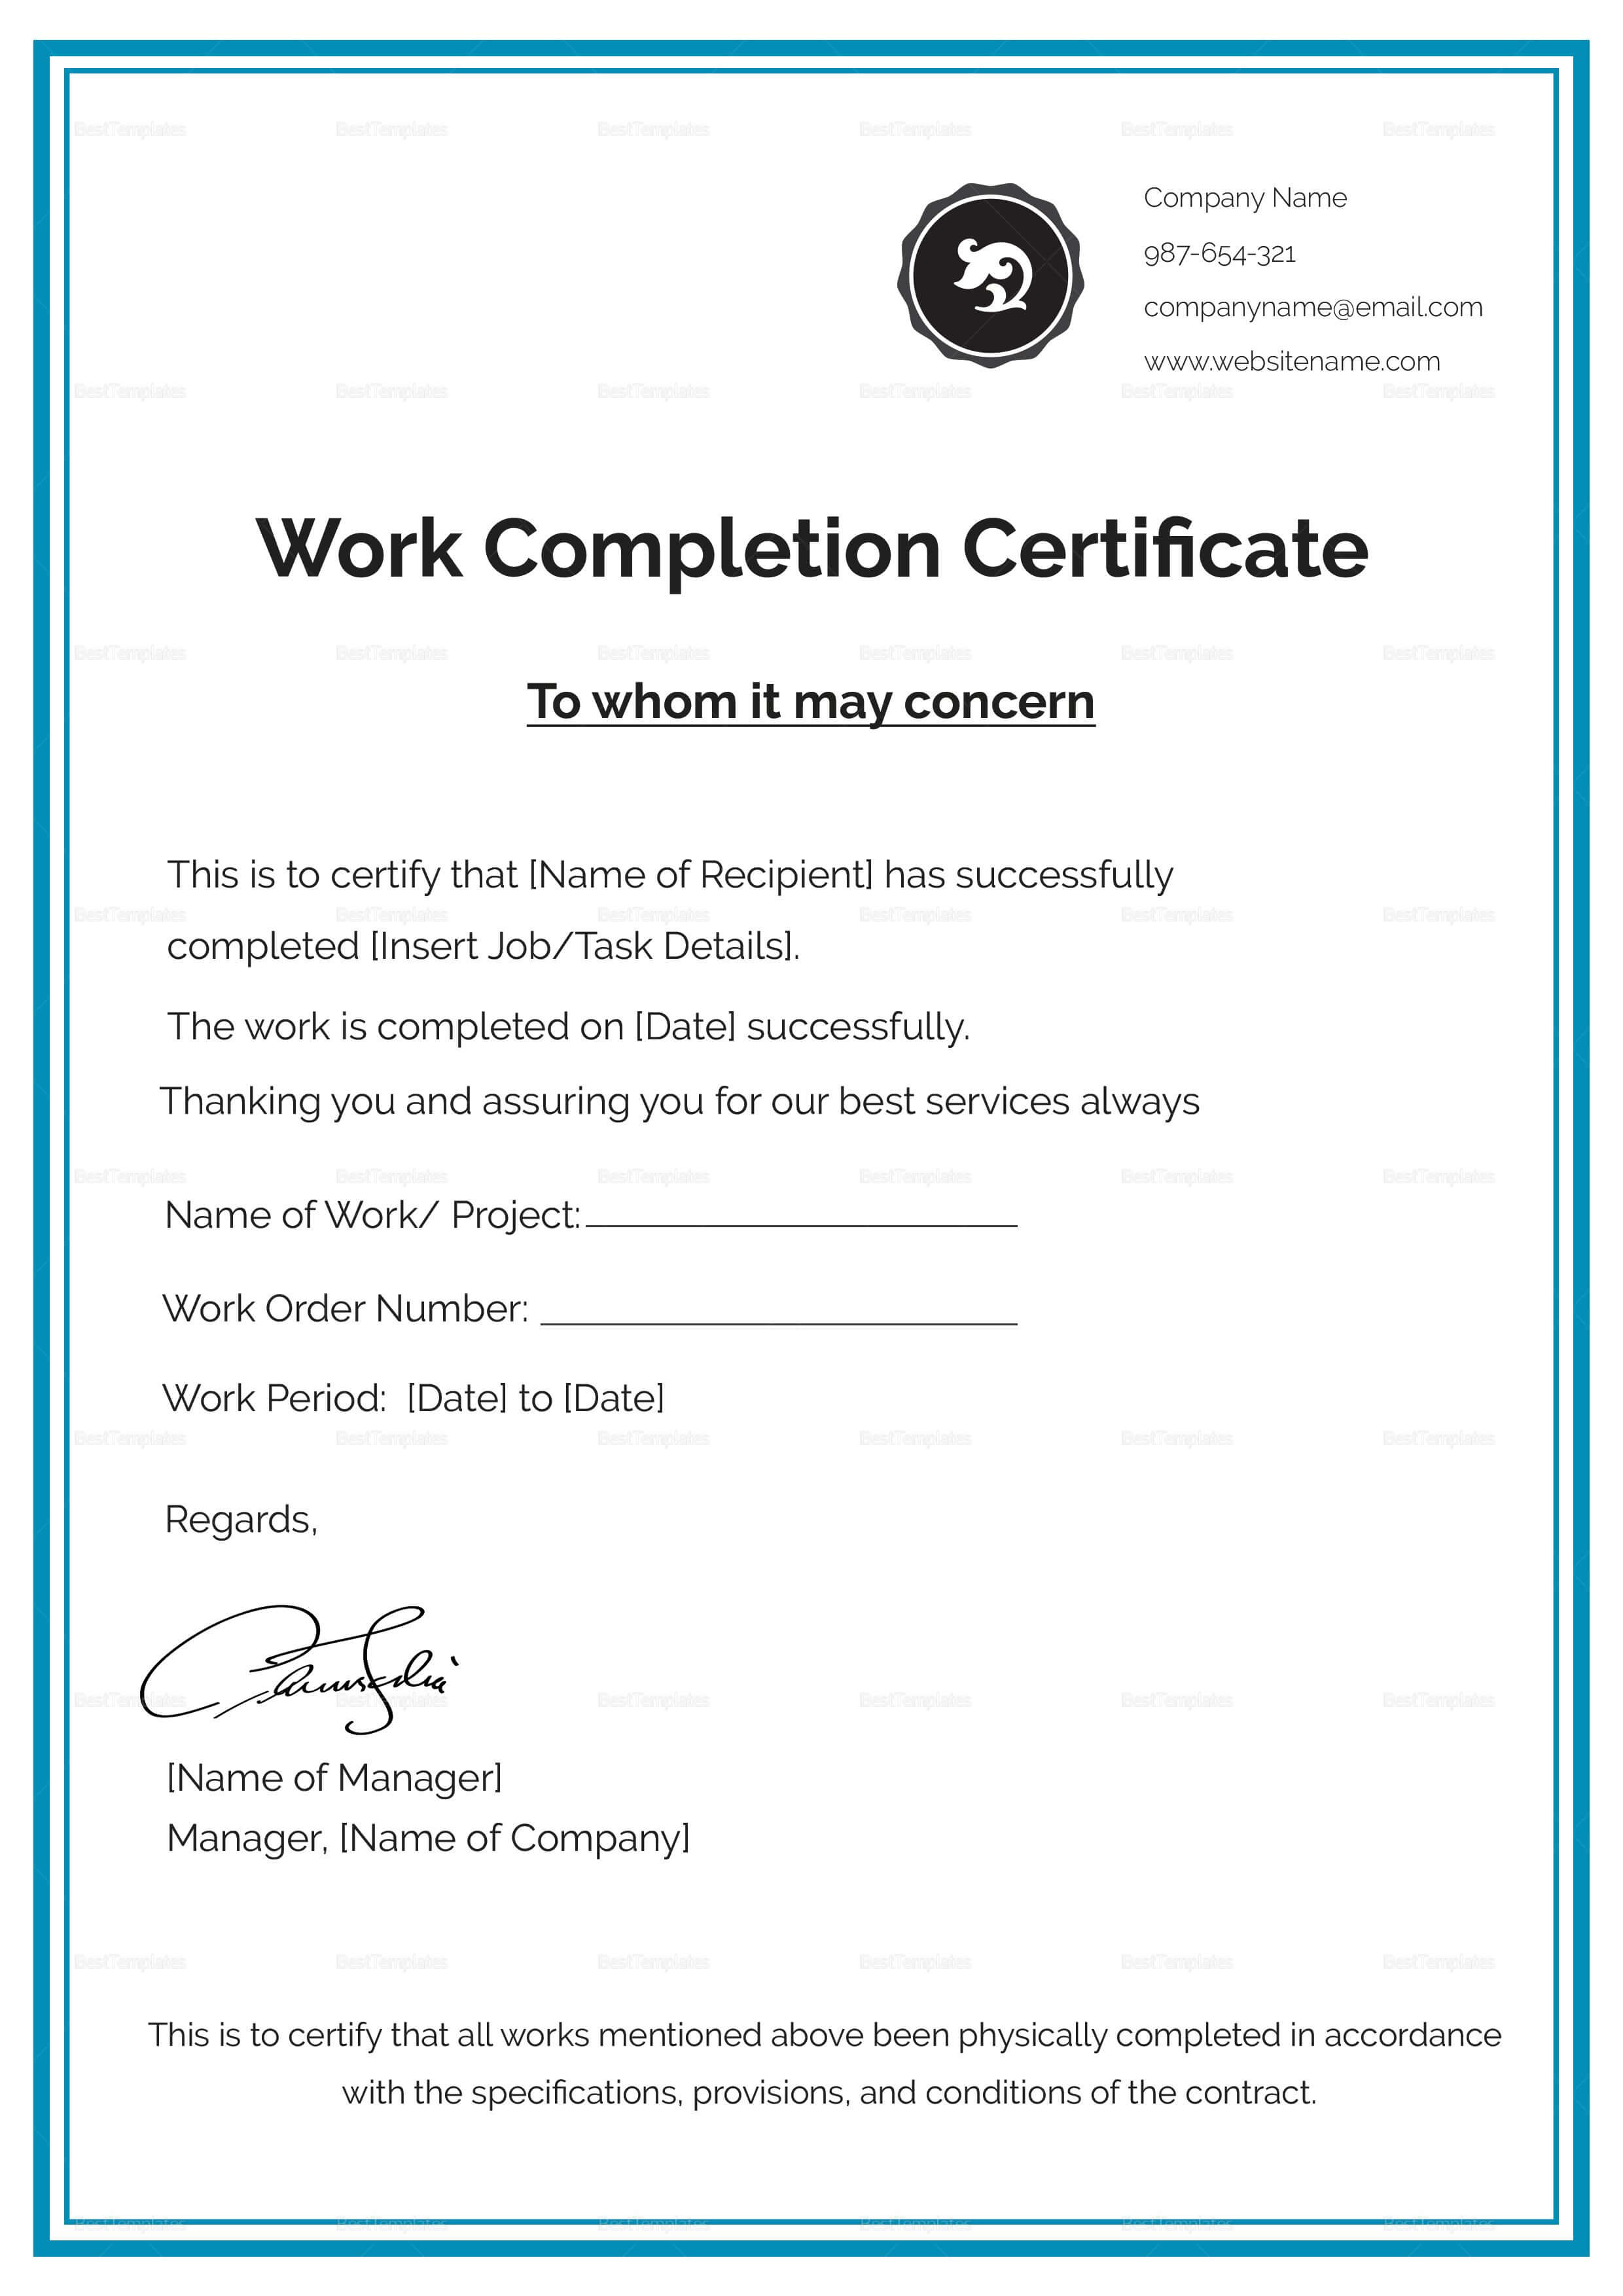 Work Completion Certificate Template | Job In 2019 Regarding Certificate Template For Project Completion